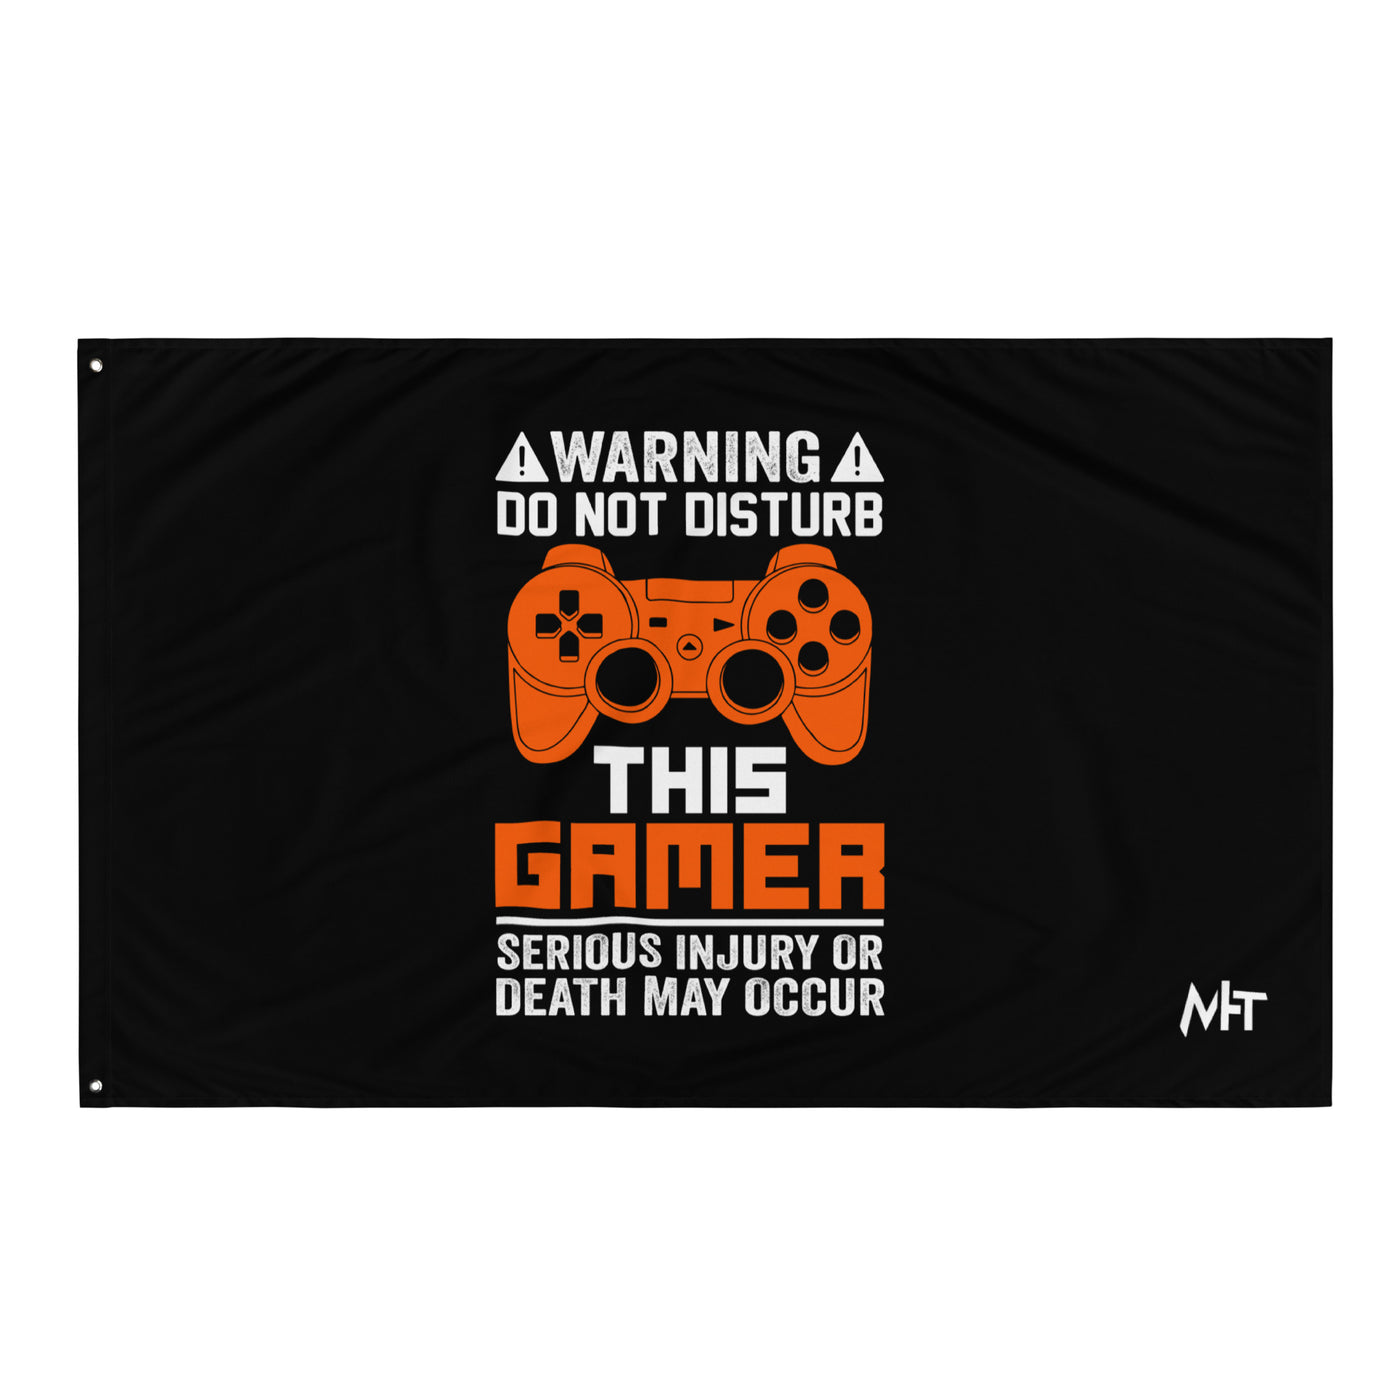 Warning: Do Not Disturb this Gamer! Serious Injury or Death may Occur - Flag